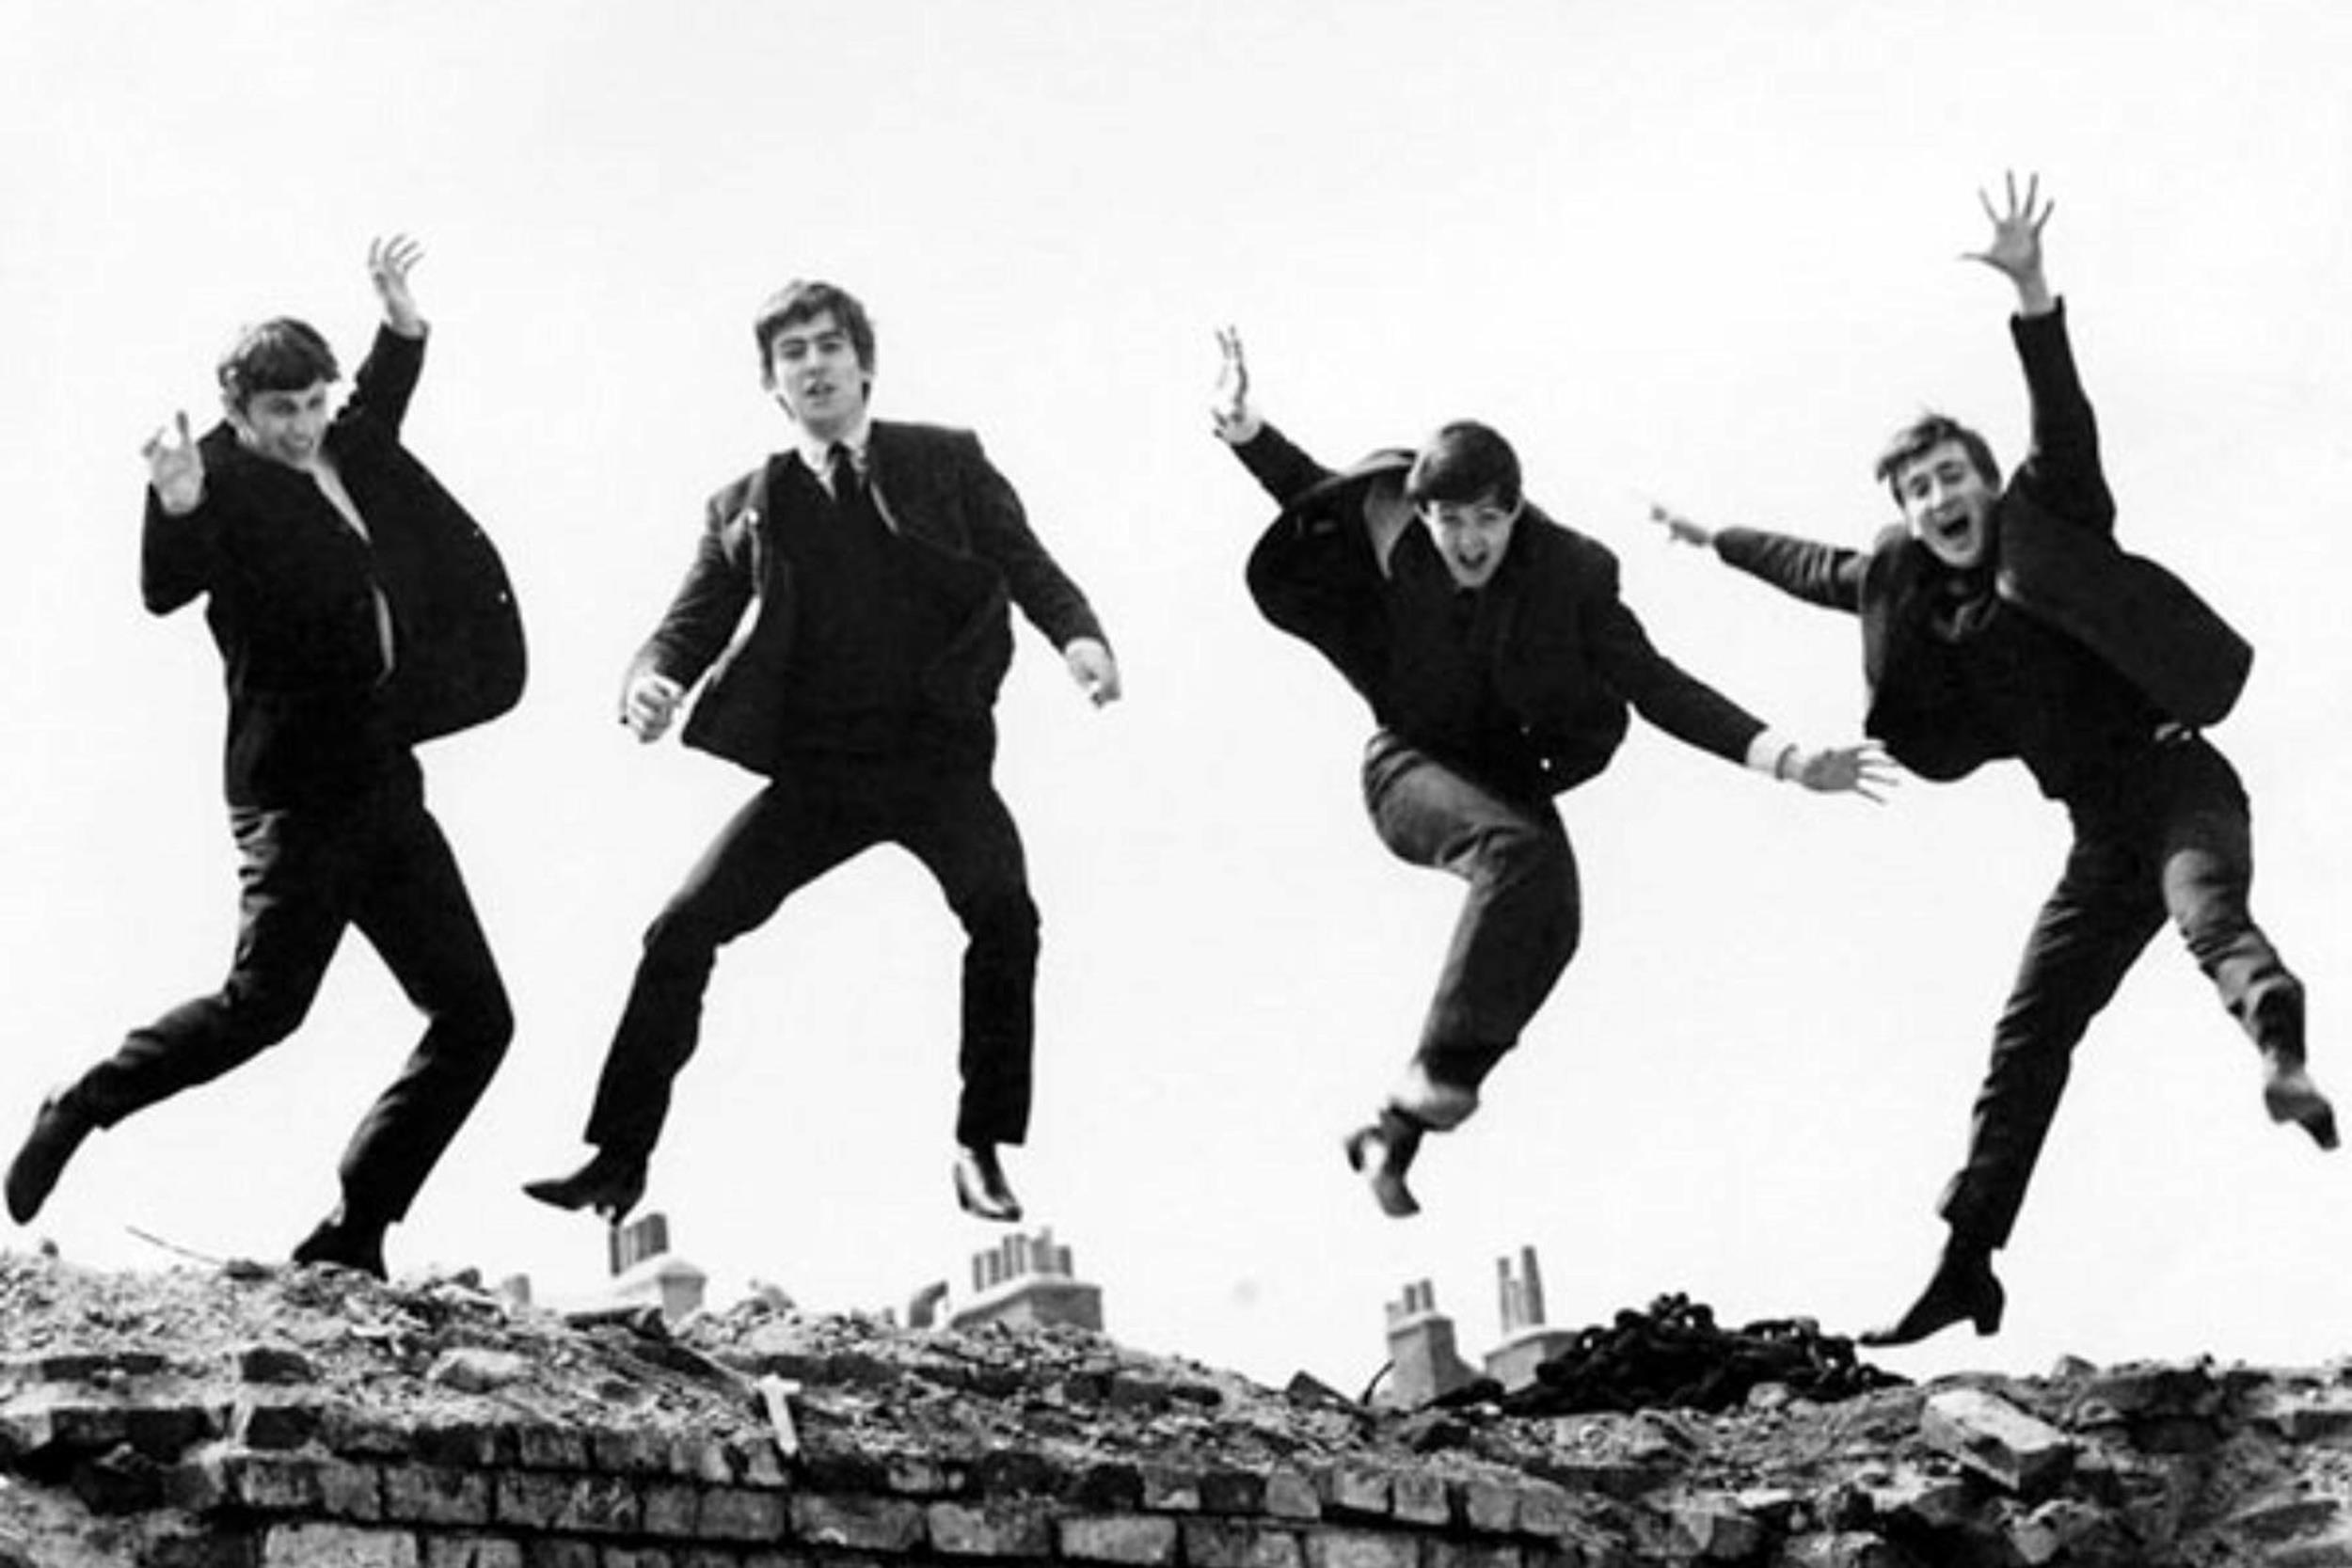 <p>The exuberant standout track from “A Hard Day’s Night” is all McCartney, though the most crucial decision in the songwriting — kicking off with the chorus — was George Martin’s idea. Director Richard Lester designed the film’s centerpiece around the single, which many consider a hugely influential piece of music video filmmaking. The jazzy energy of the song also appealed to Ella Fitzgerald, who recorded a cover version in 1964. </p><p>You may also like: <a href='https://www.yardbarker.com/entertainment/articles/the_best_final_lines_from_movies_012524/s1__39121870'>The best final lines from movies</a></p>